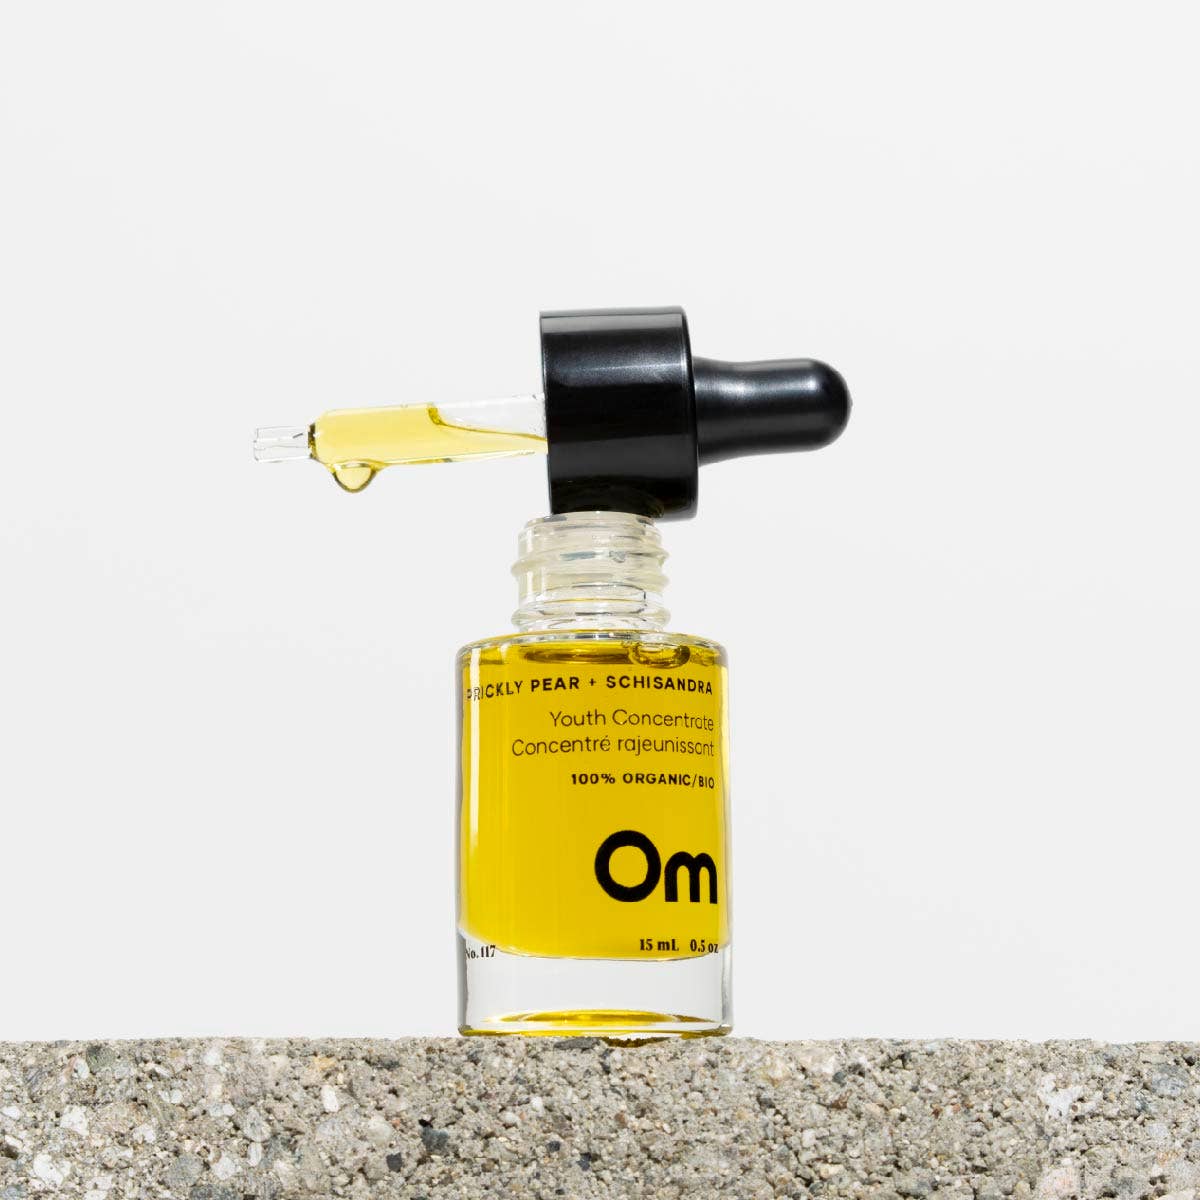 Prickly Pear + Schisandra Youth Concentrate - OM Organics Skincare- Full size